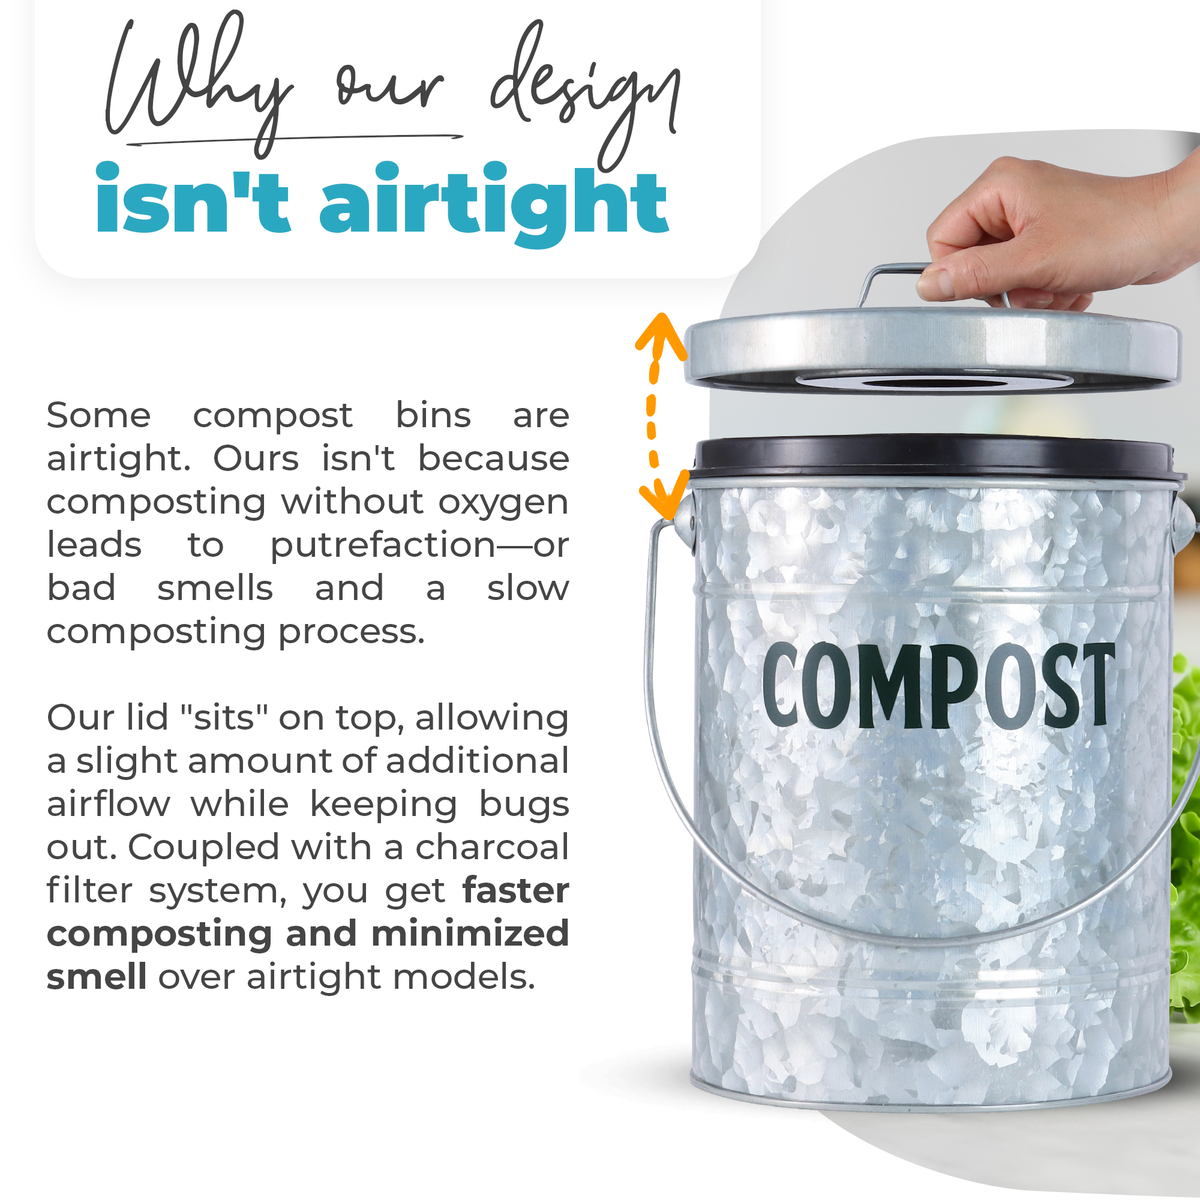 Sit-on-top lid that minimized smell and for faster composting over airtight models